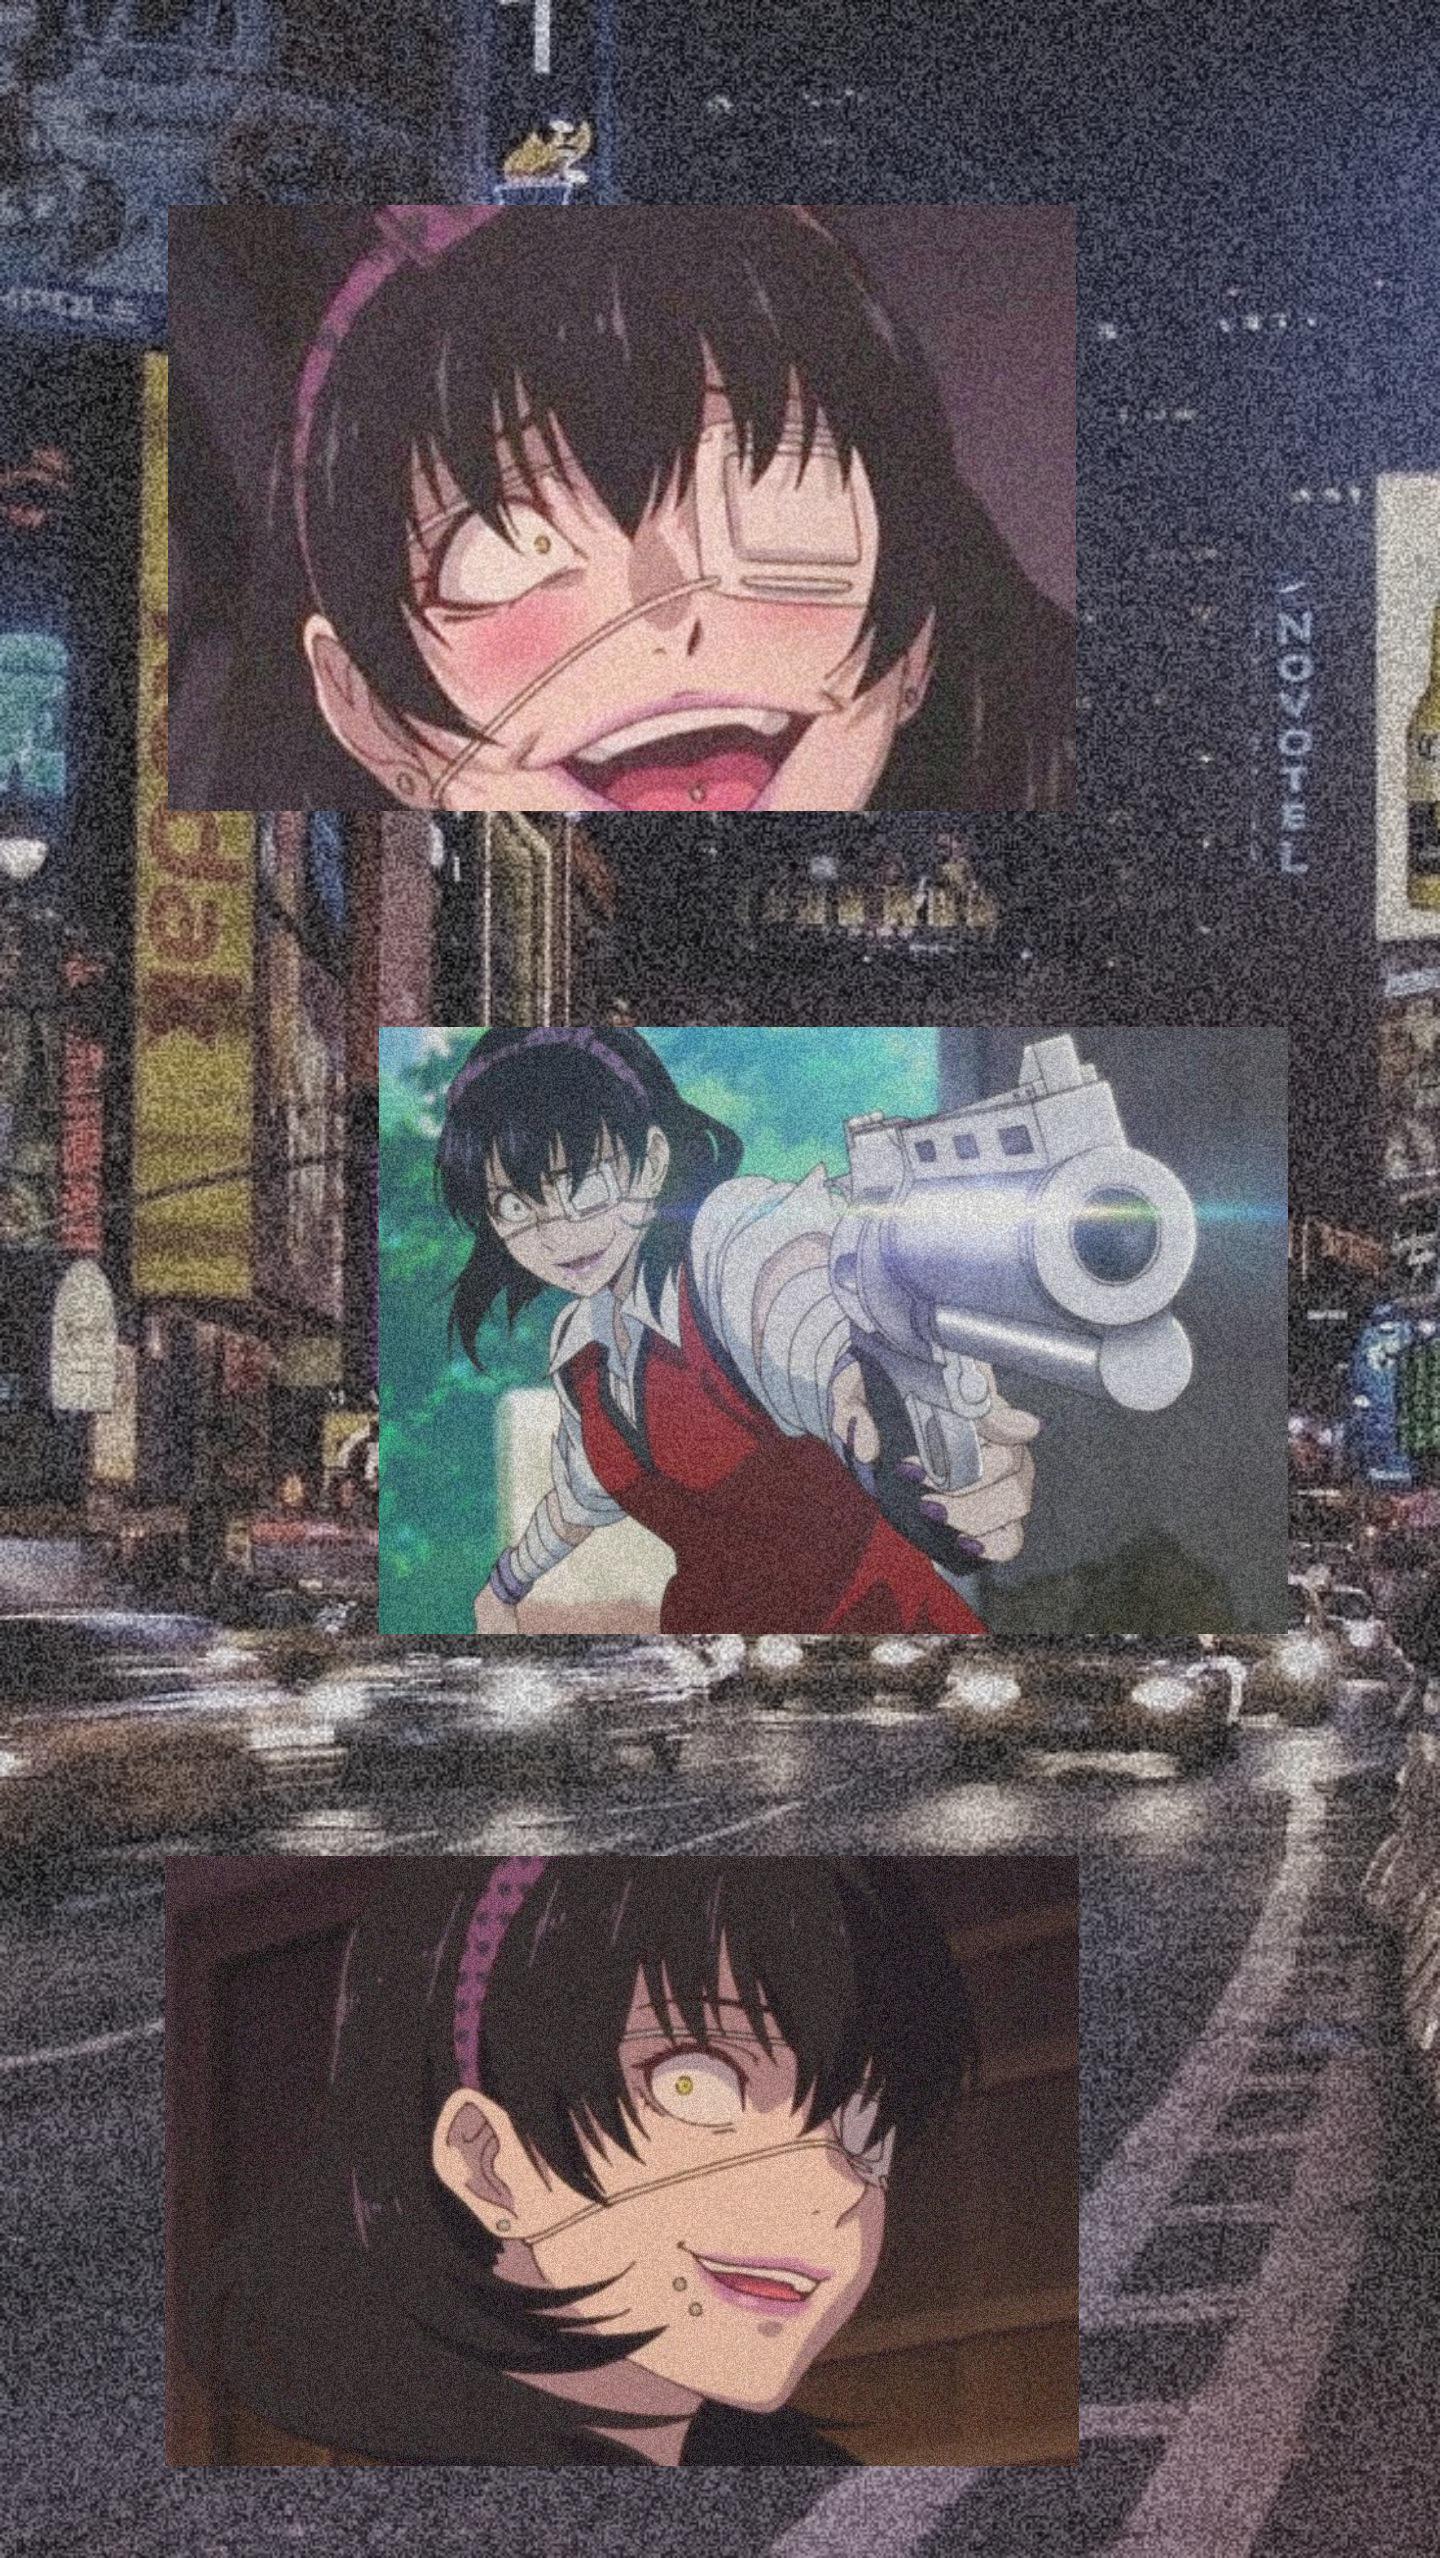 I made this Midari wallpaper. I mean, its not the best, but its something